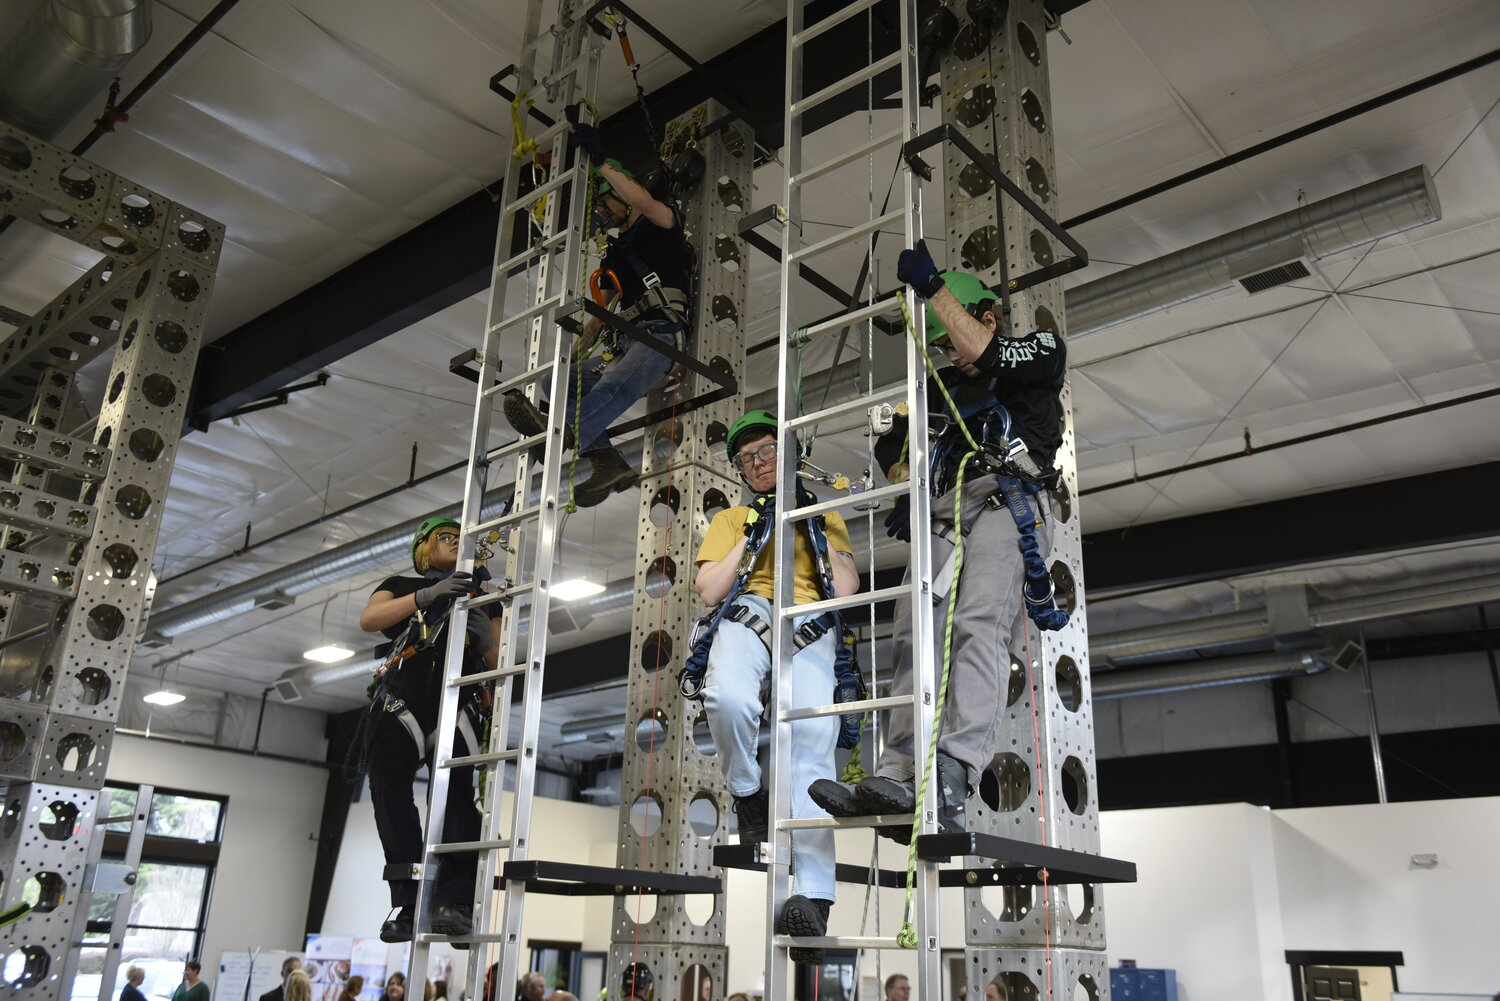 Students from Northwest Renewable Energy Institute practice climbing for high elevation wind turbine repairs and emergency rescues.